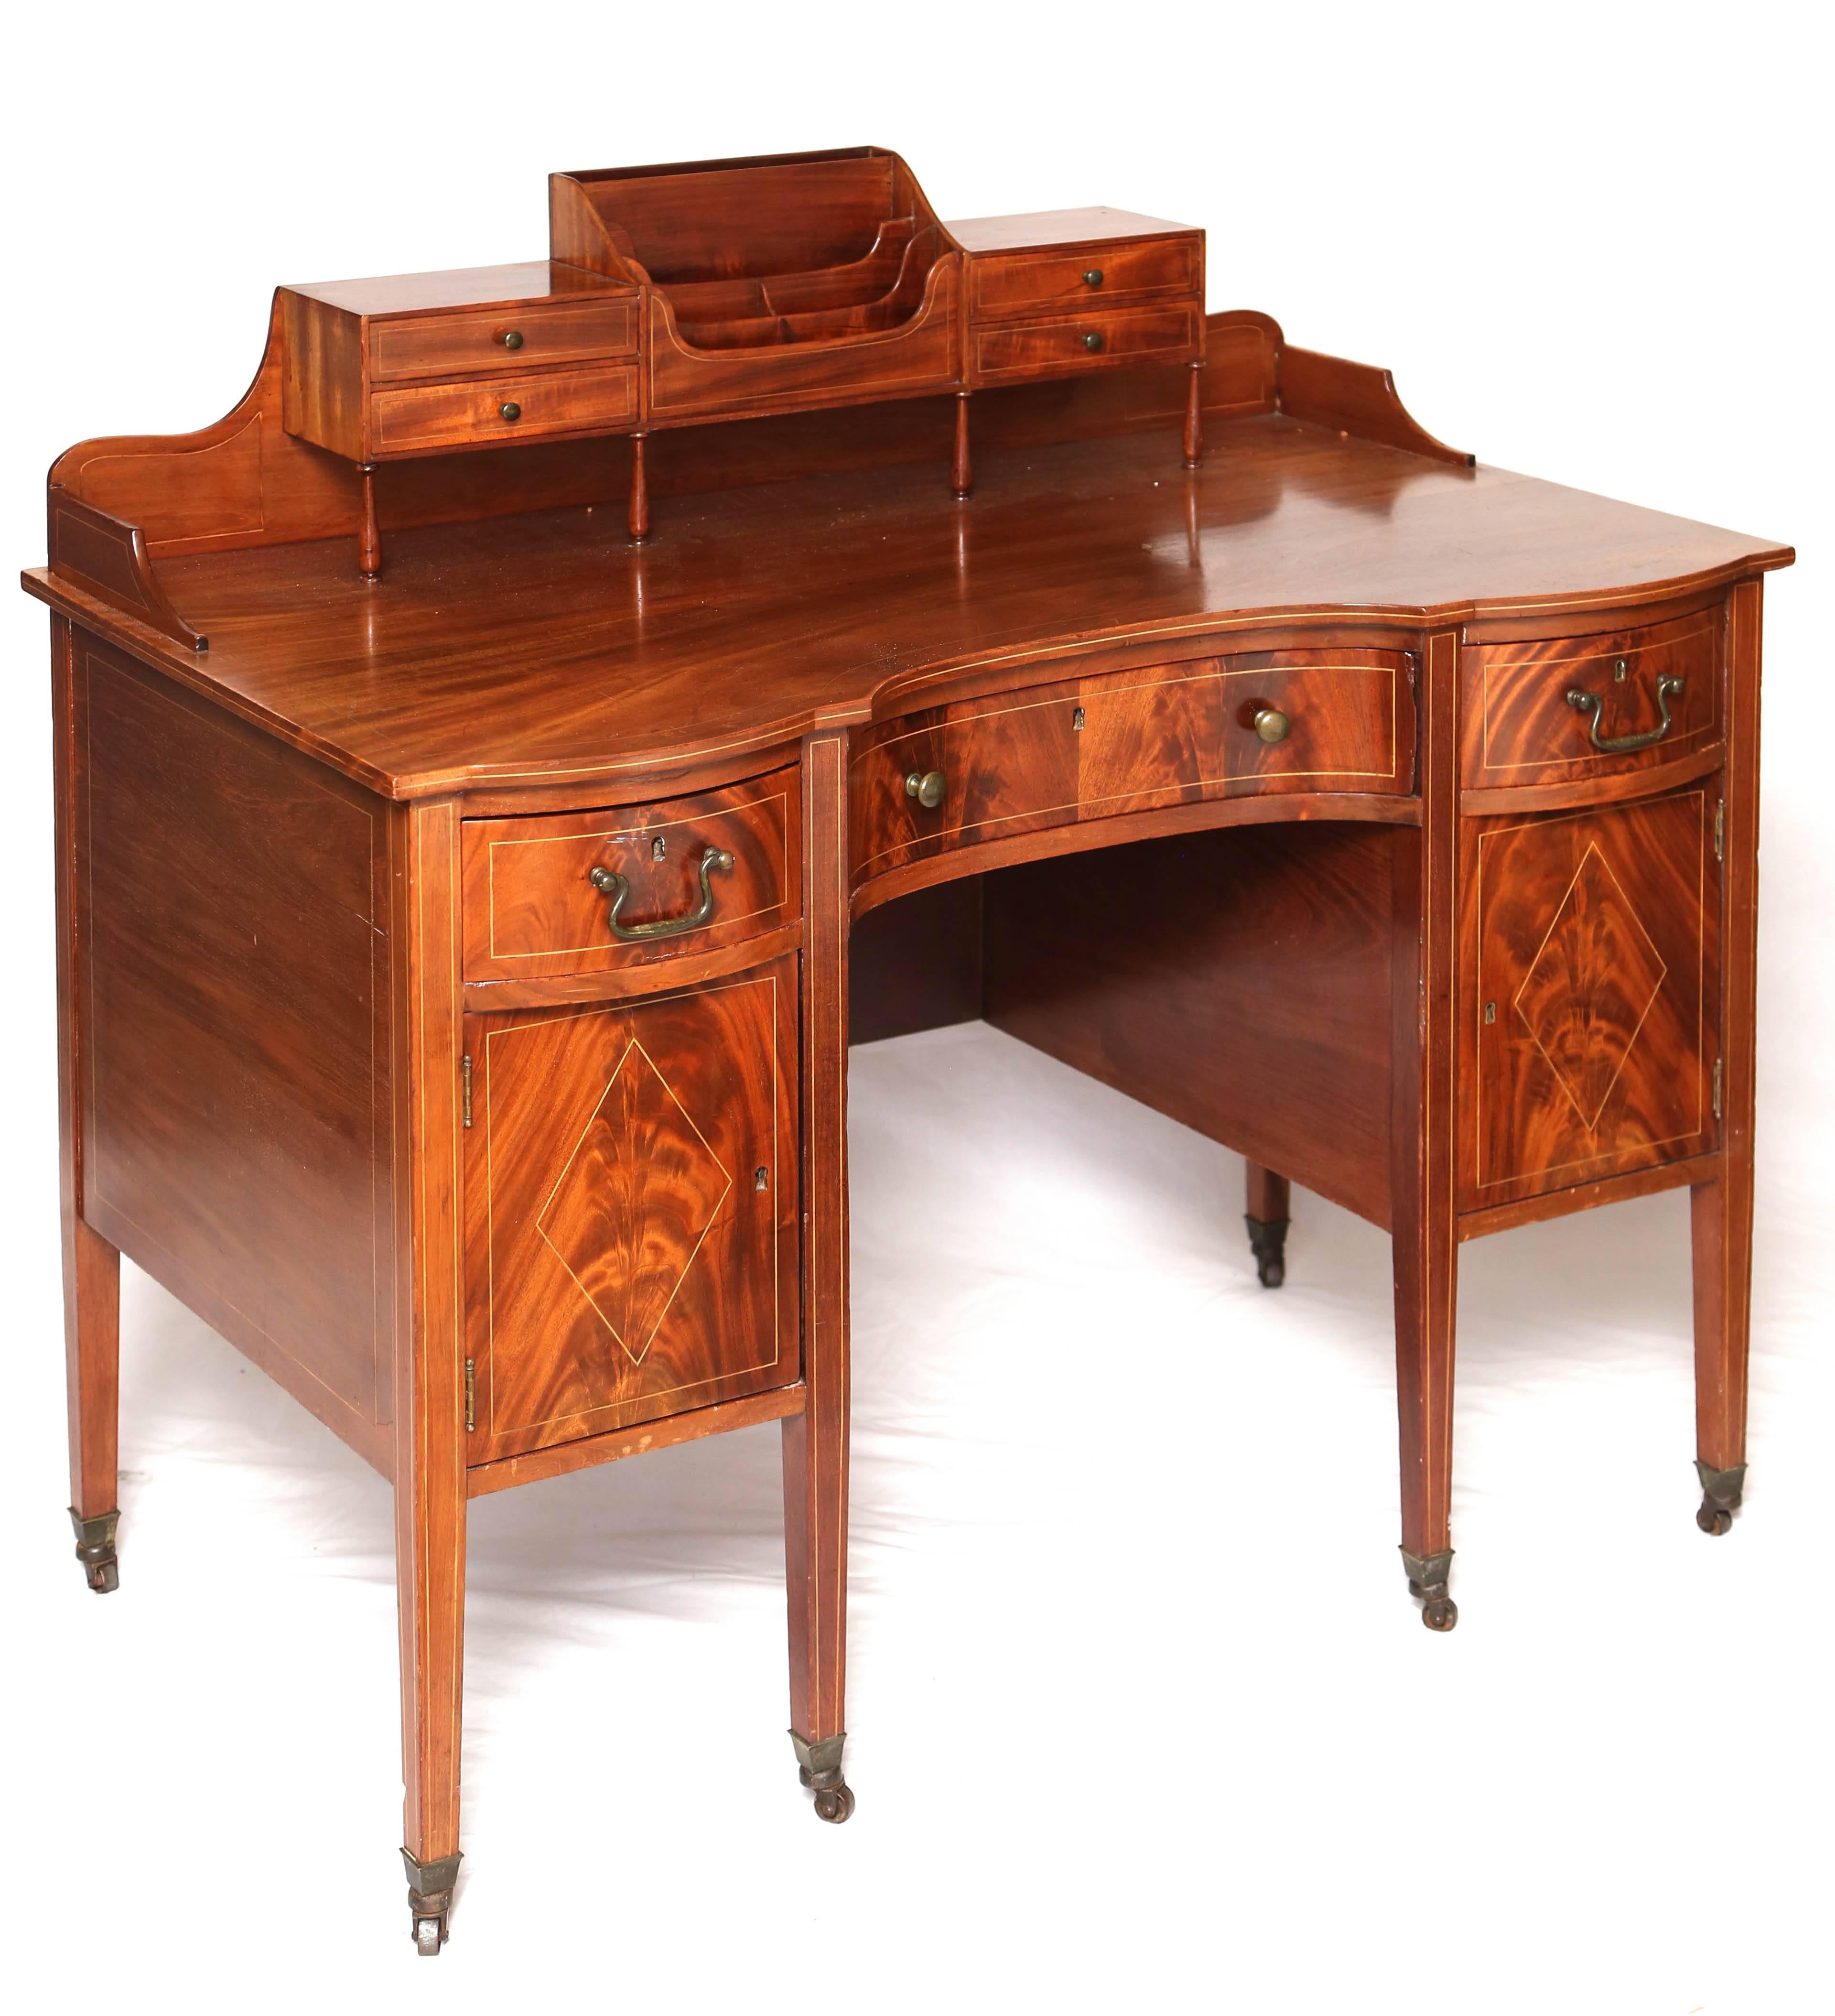 This is a very nice antique Mahogany writing desk, letter holder and drawers above three side by side drawers with cabinet doors, 40 H x 40" W x 25"D (at widest).
It has satinwood string inlay brass drop handles and also brass